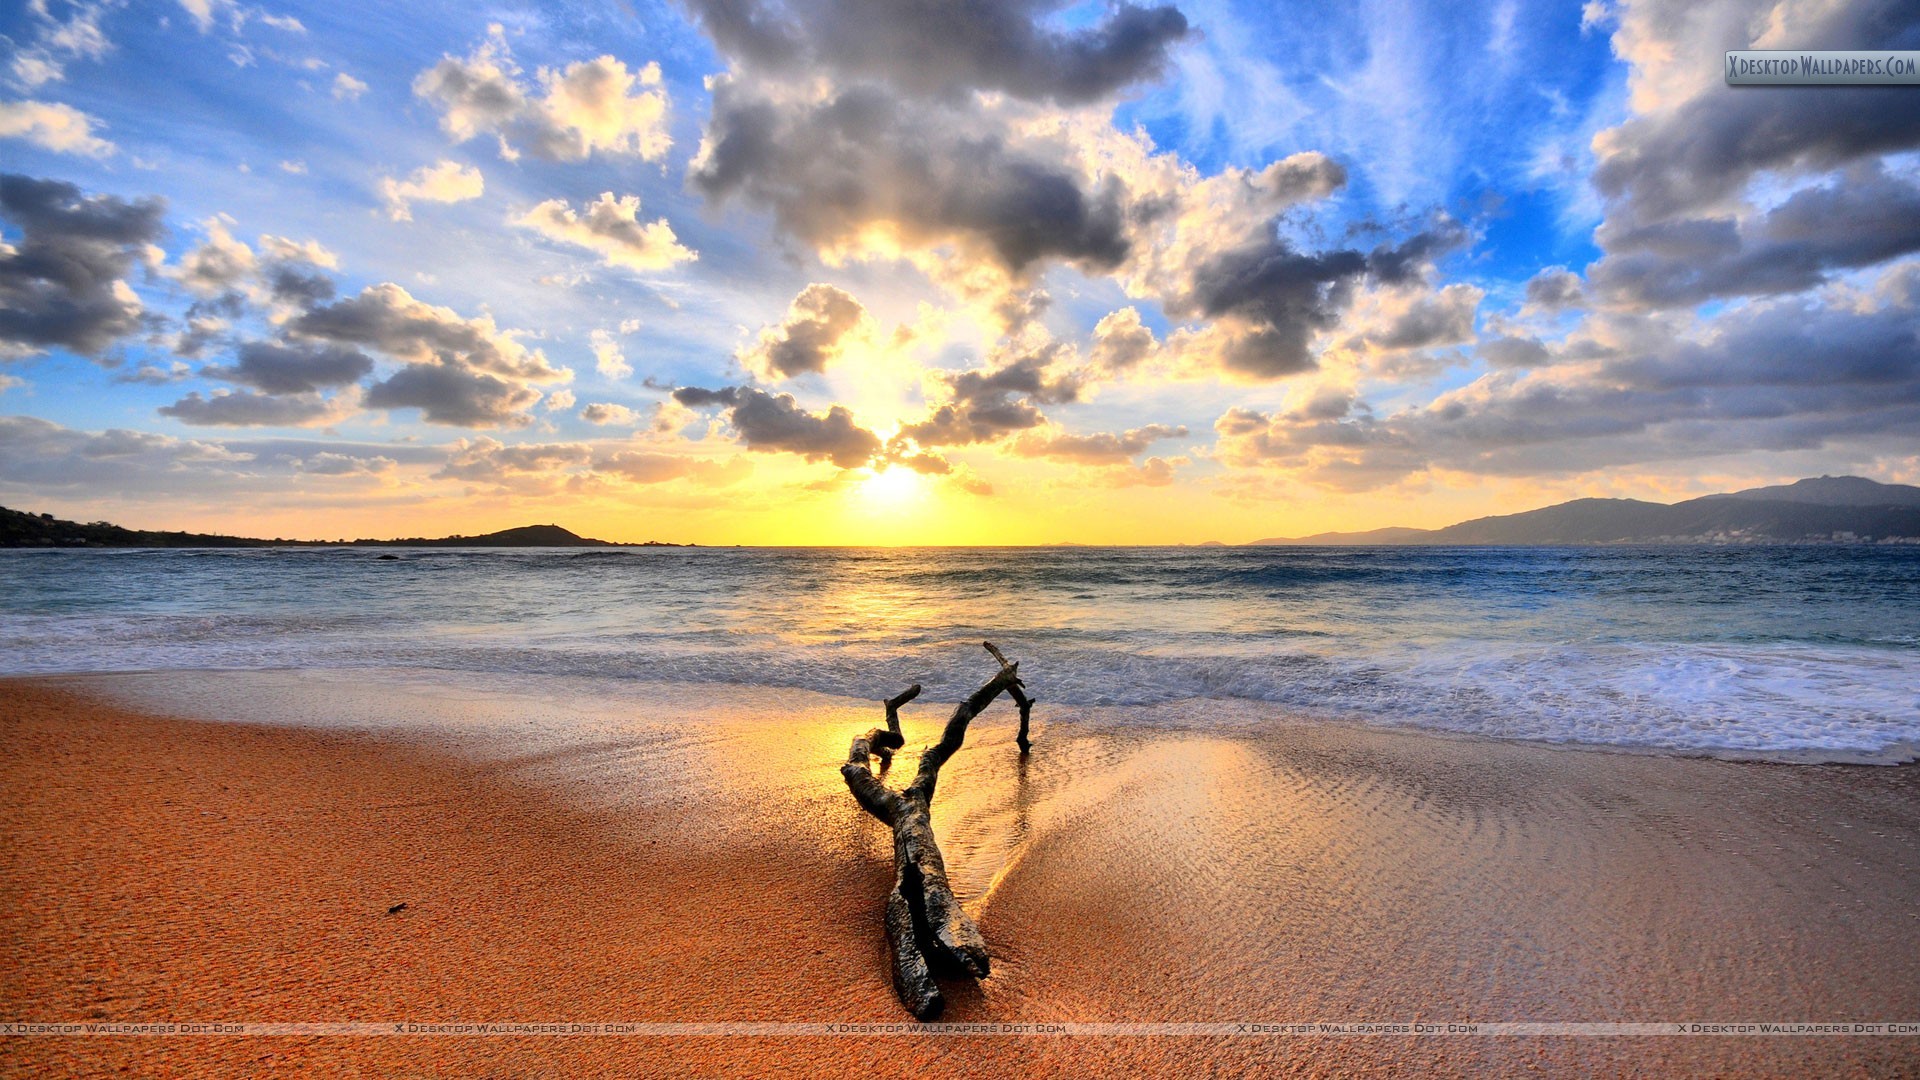 1920x1080 You are viewing wallpaper titled "Sunset Beach ...